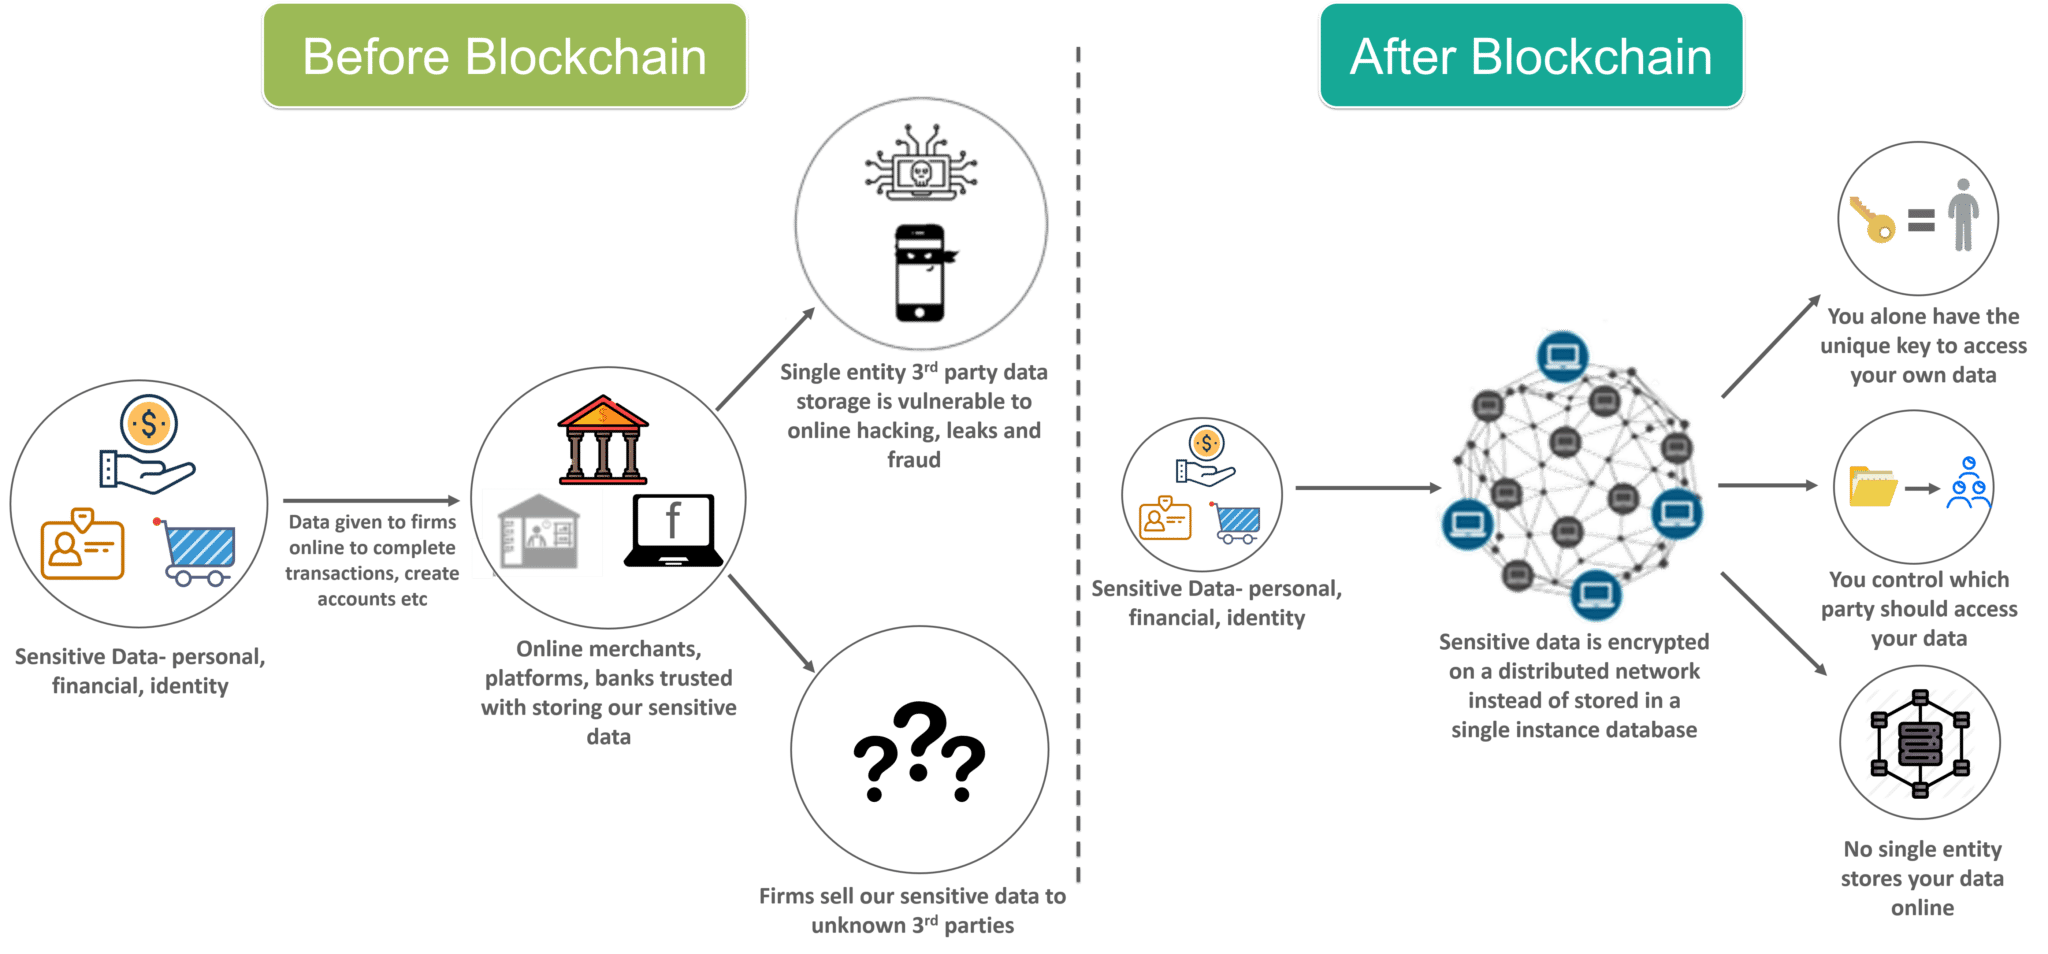 Analyzing blockchain and bitcoin transaction data as graph final number of bitcoins